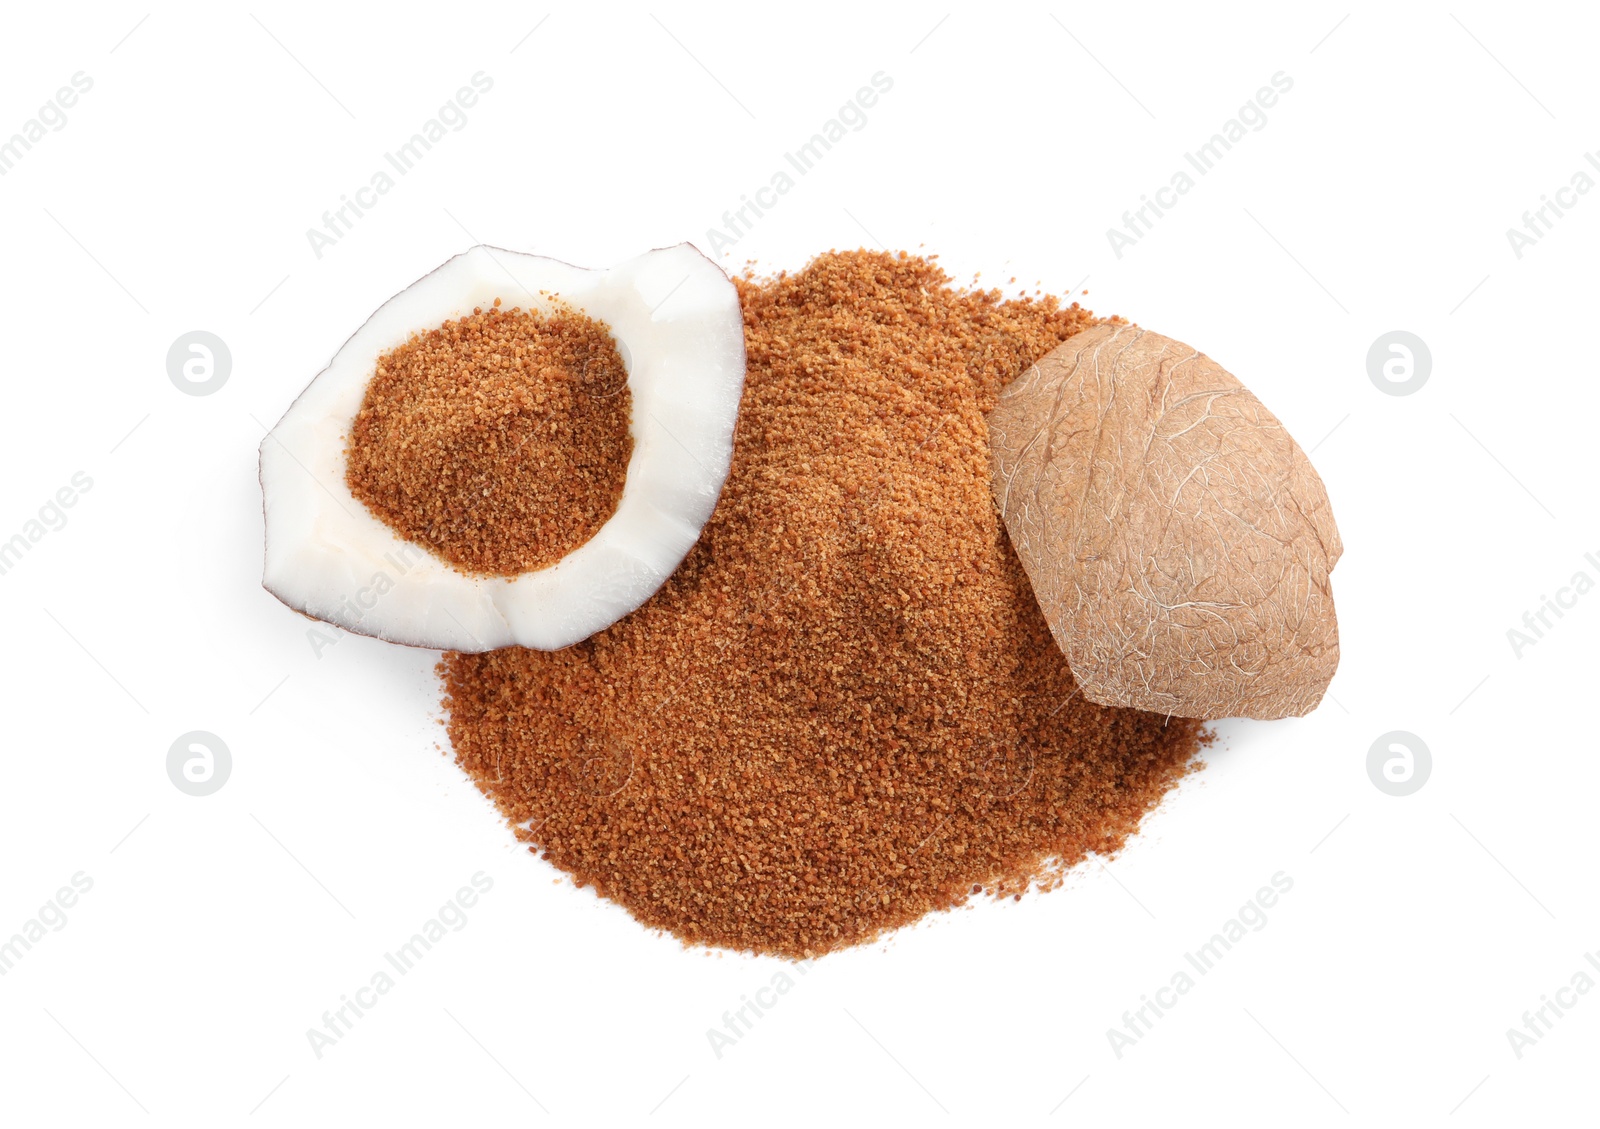 Photo of Ripe coconut and pile of brown sugar on white background, top view